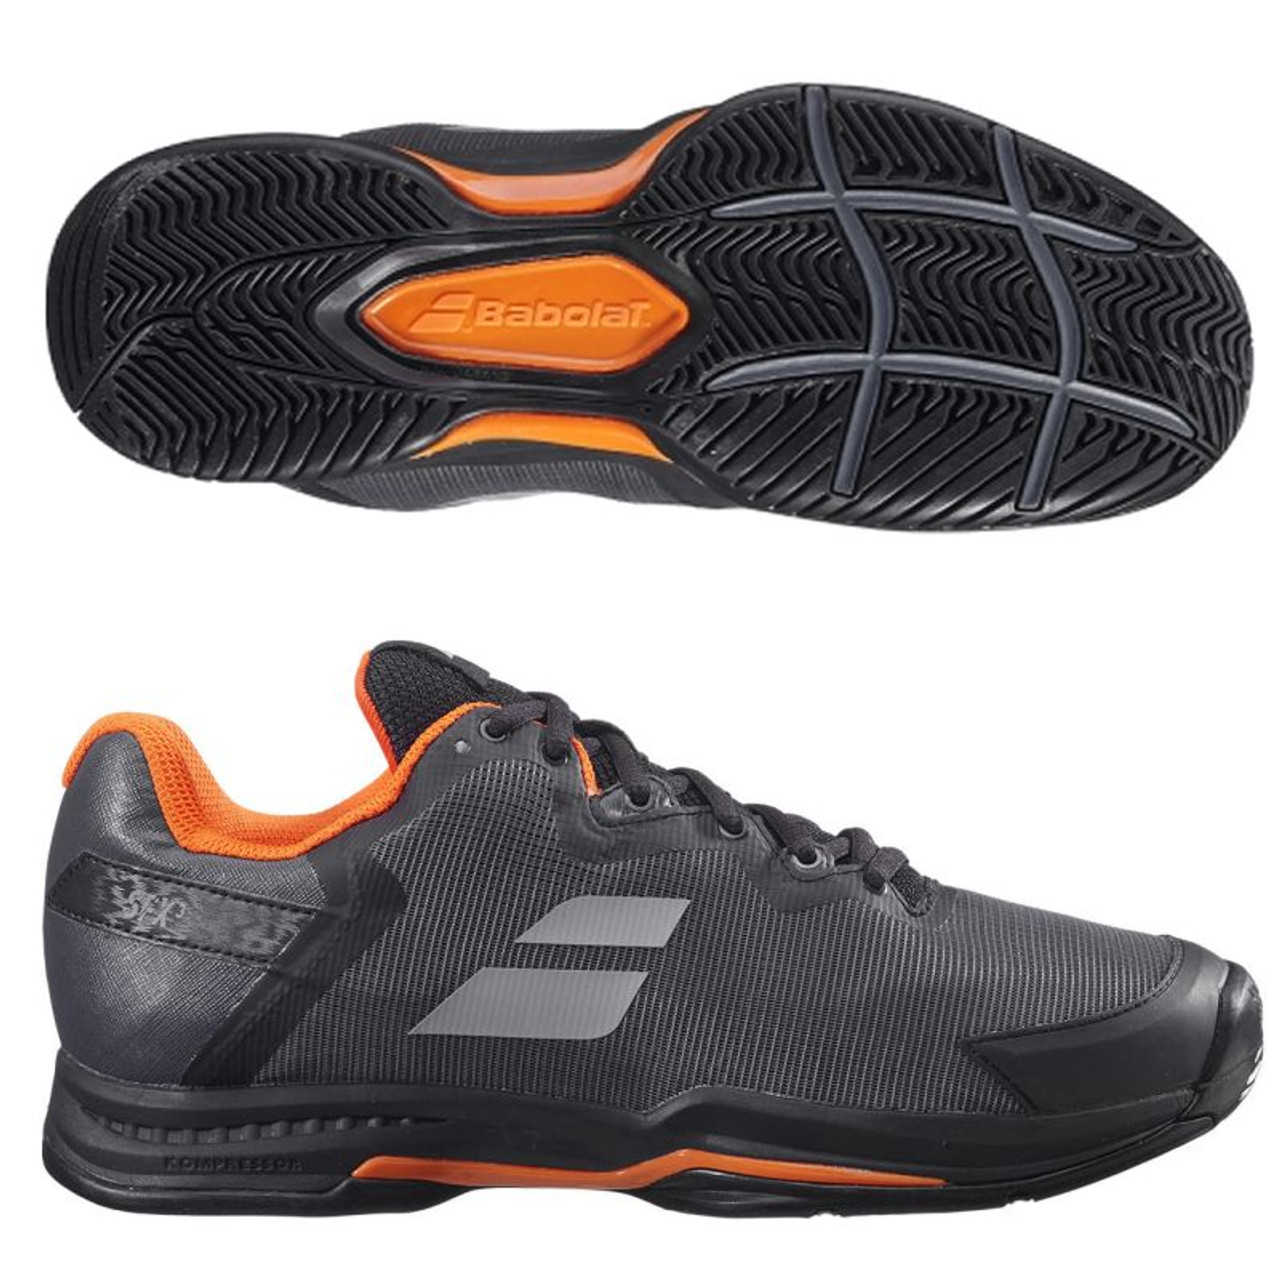 Babolat SFX3 All Court Mens Shoe is Wide, Lightweight and So Comfortable pic picture